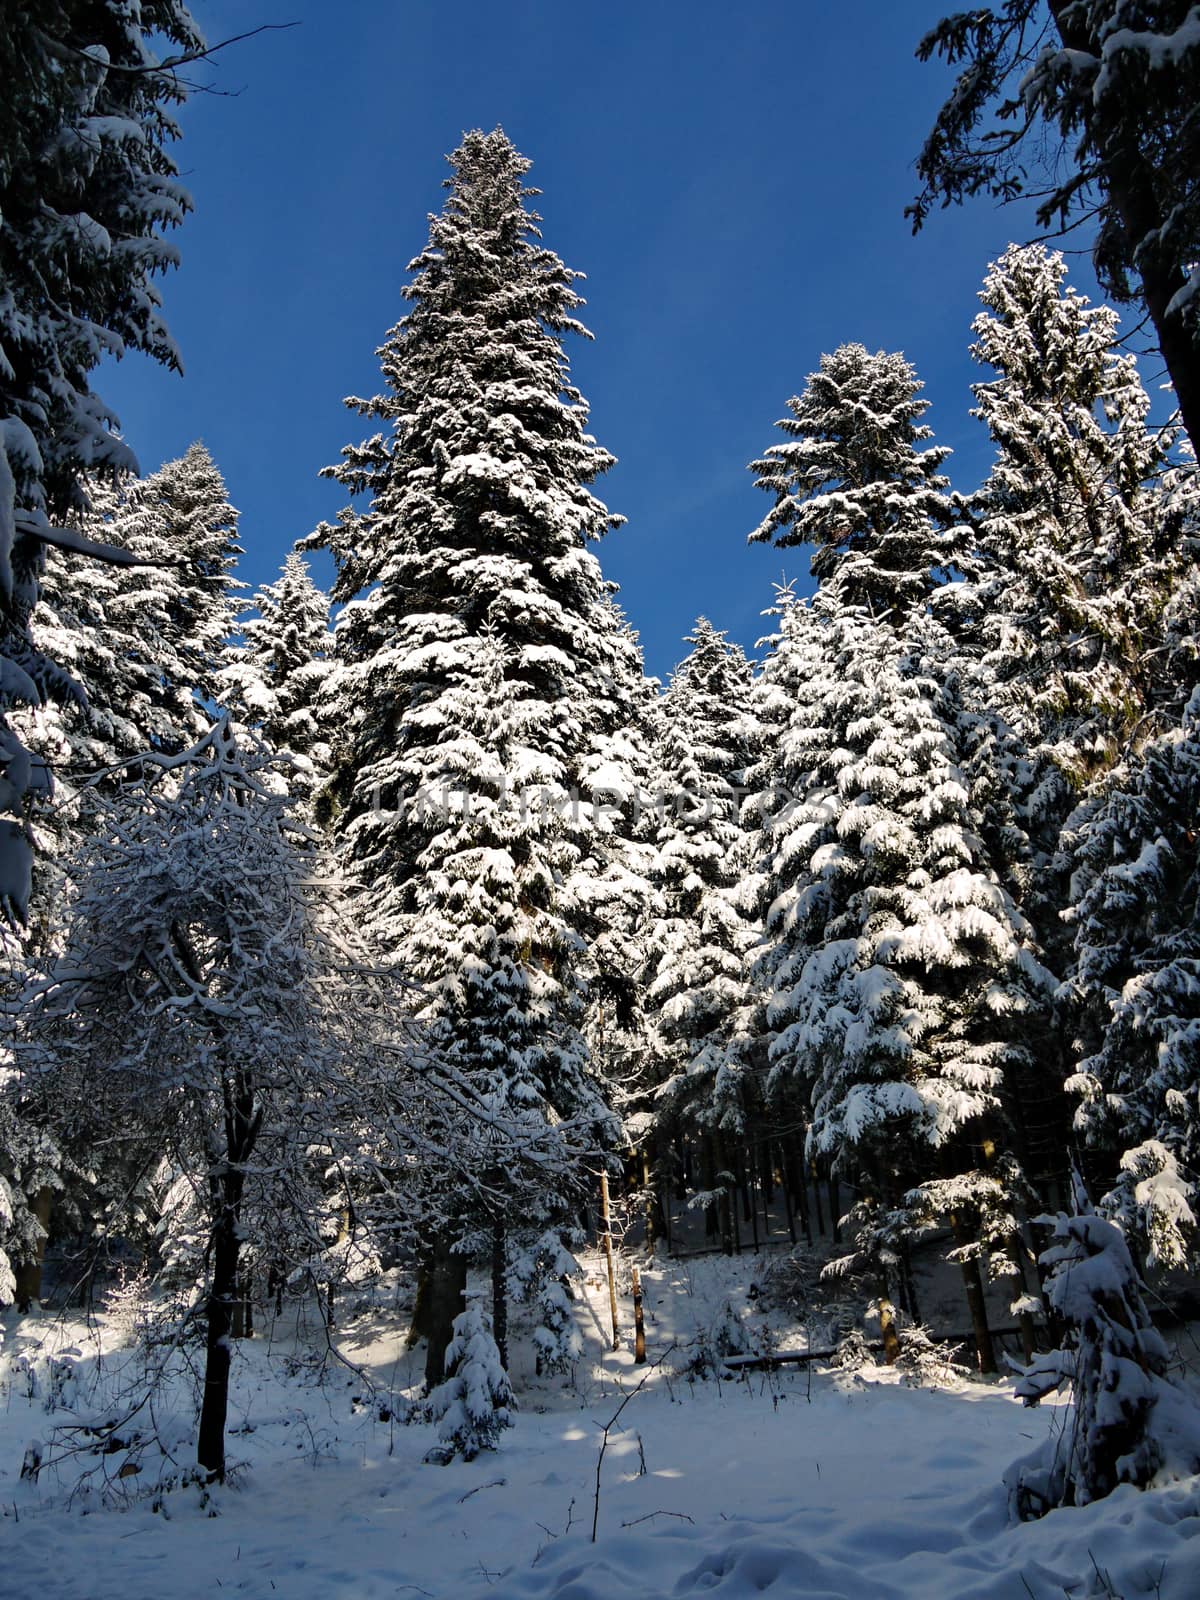 Winter coniferous forest, in which all the trees are covered with thick, heavy hats of snow by Adamchuk